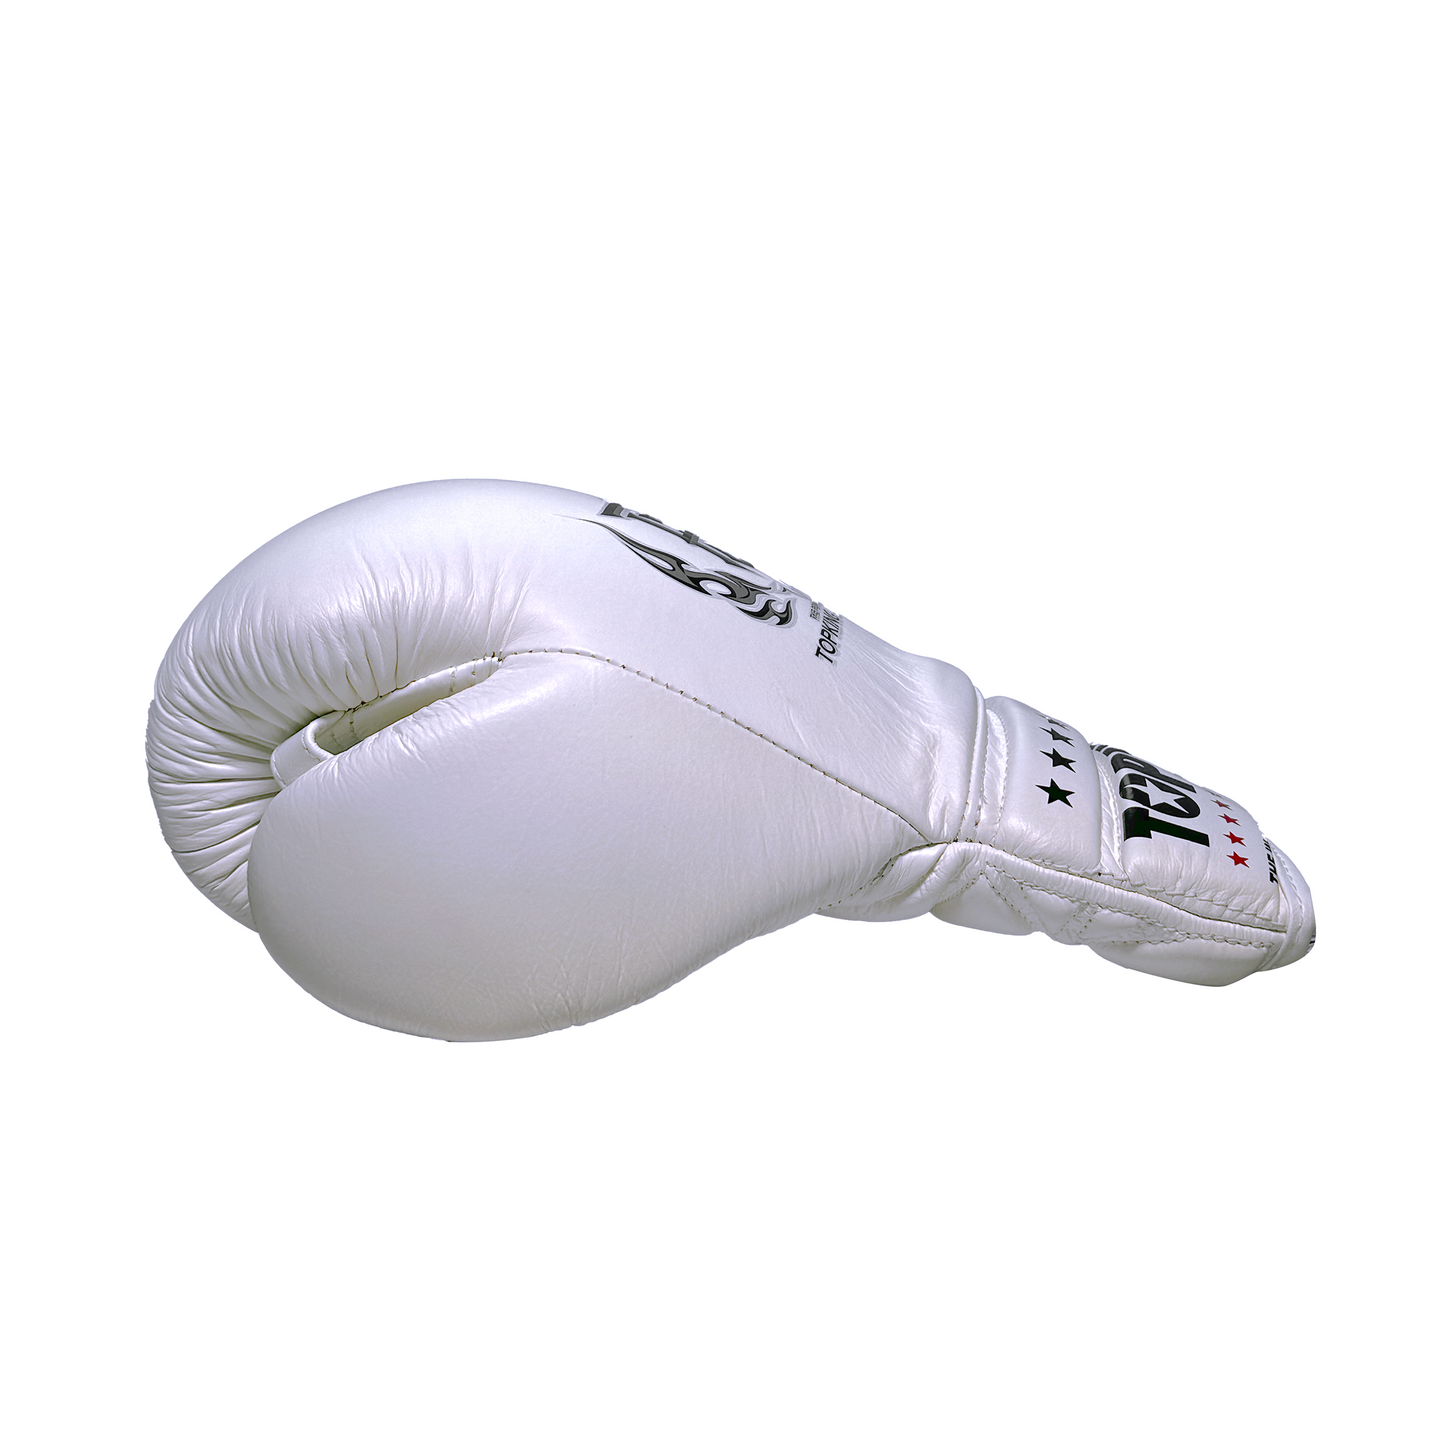 Top King Boxhandschuhe "Super Competition" White